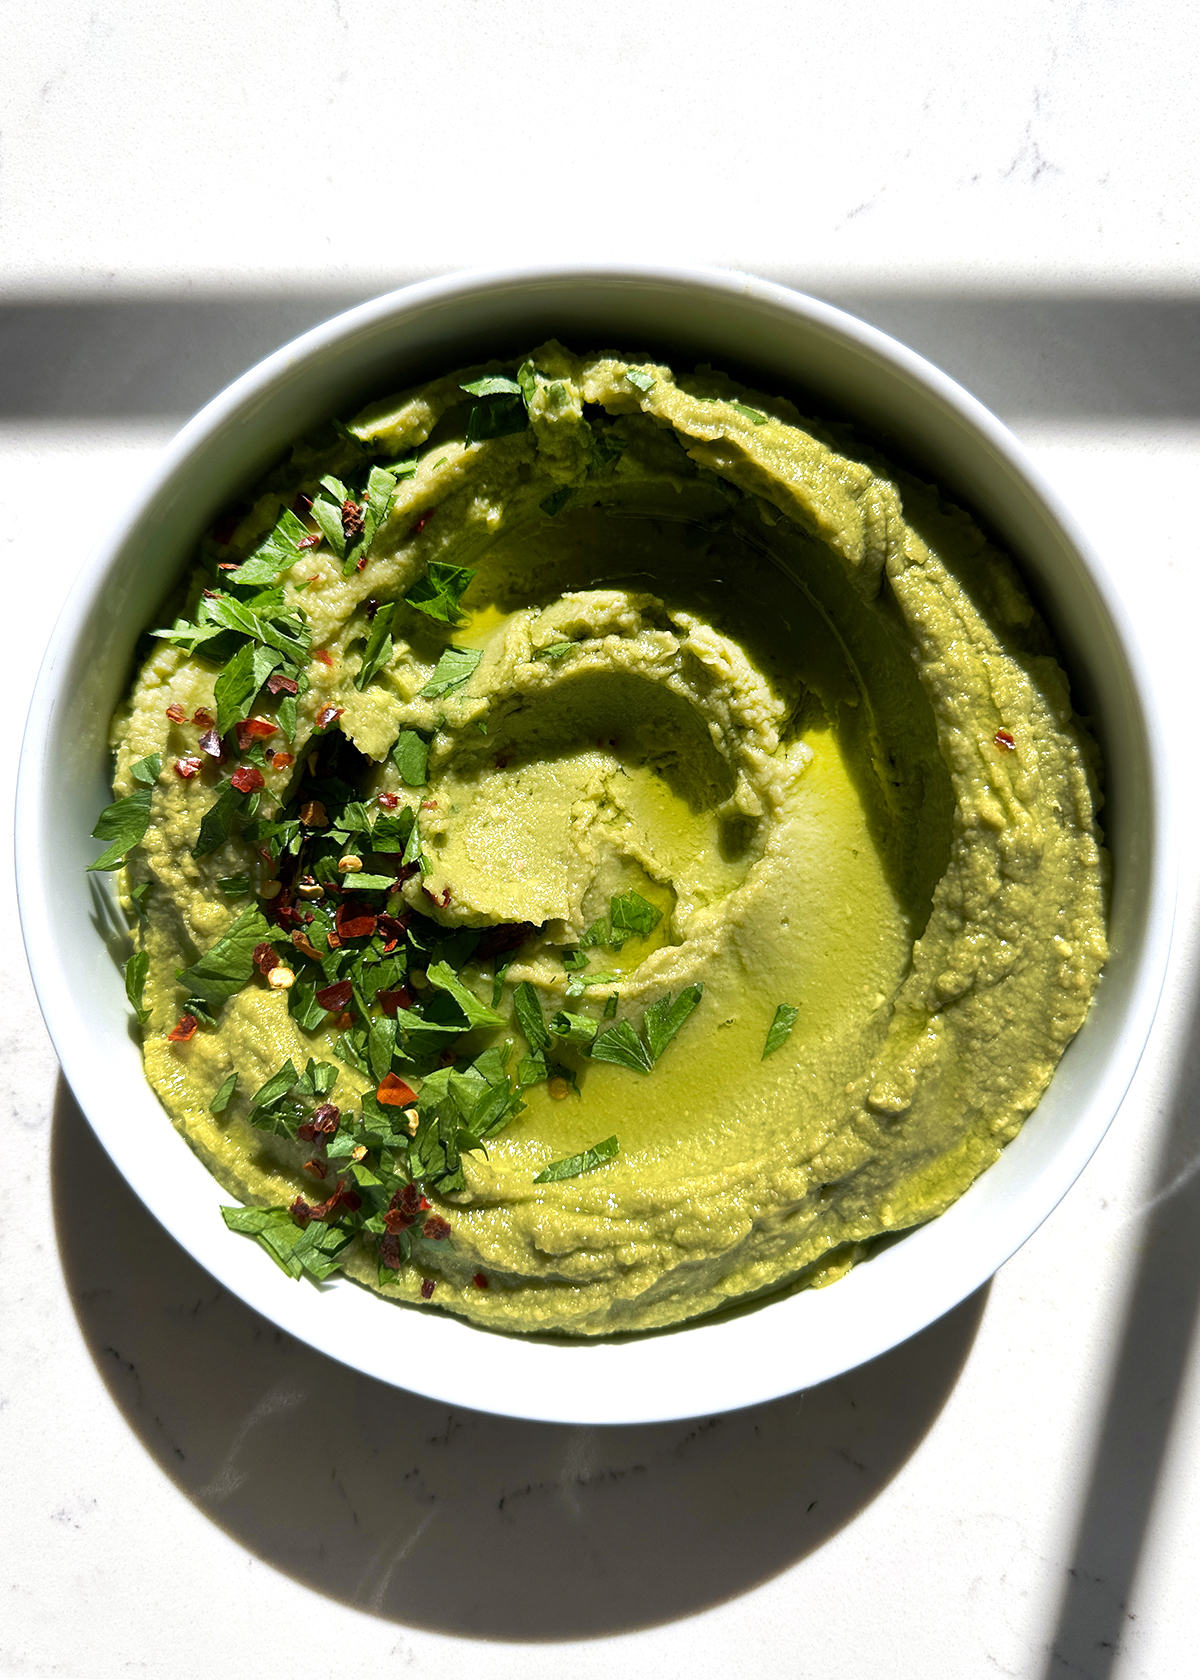 green avocado hummus garnished with parsley and crushed red pepper flakesin white sserving bowl